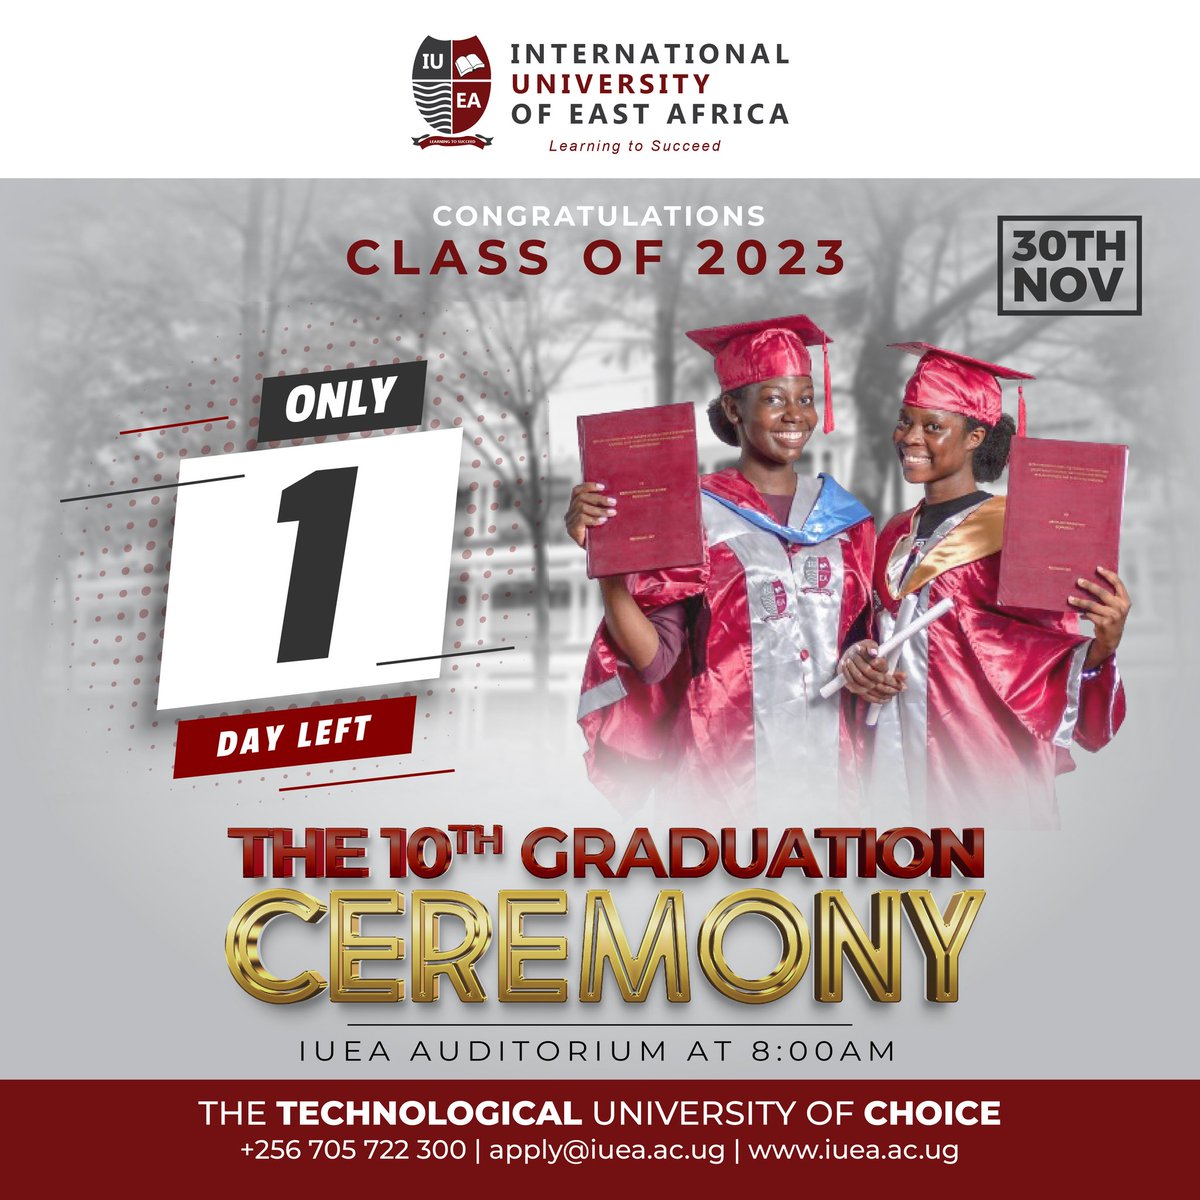 Tomorrow is the day! We've made it to our 10th graduation!
Get ready to celebrate all that we've accomplished! 😍

•
•
•

#IUEAClassOf2023 #DecadeOfExcellence #10YearsStrong #IUEA #LearningToSucceed #GraduationDay #NextChapter #ProudGraduate